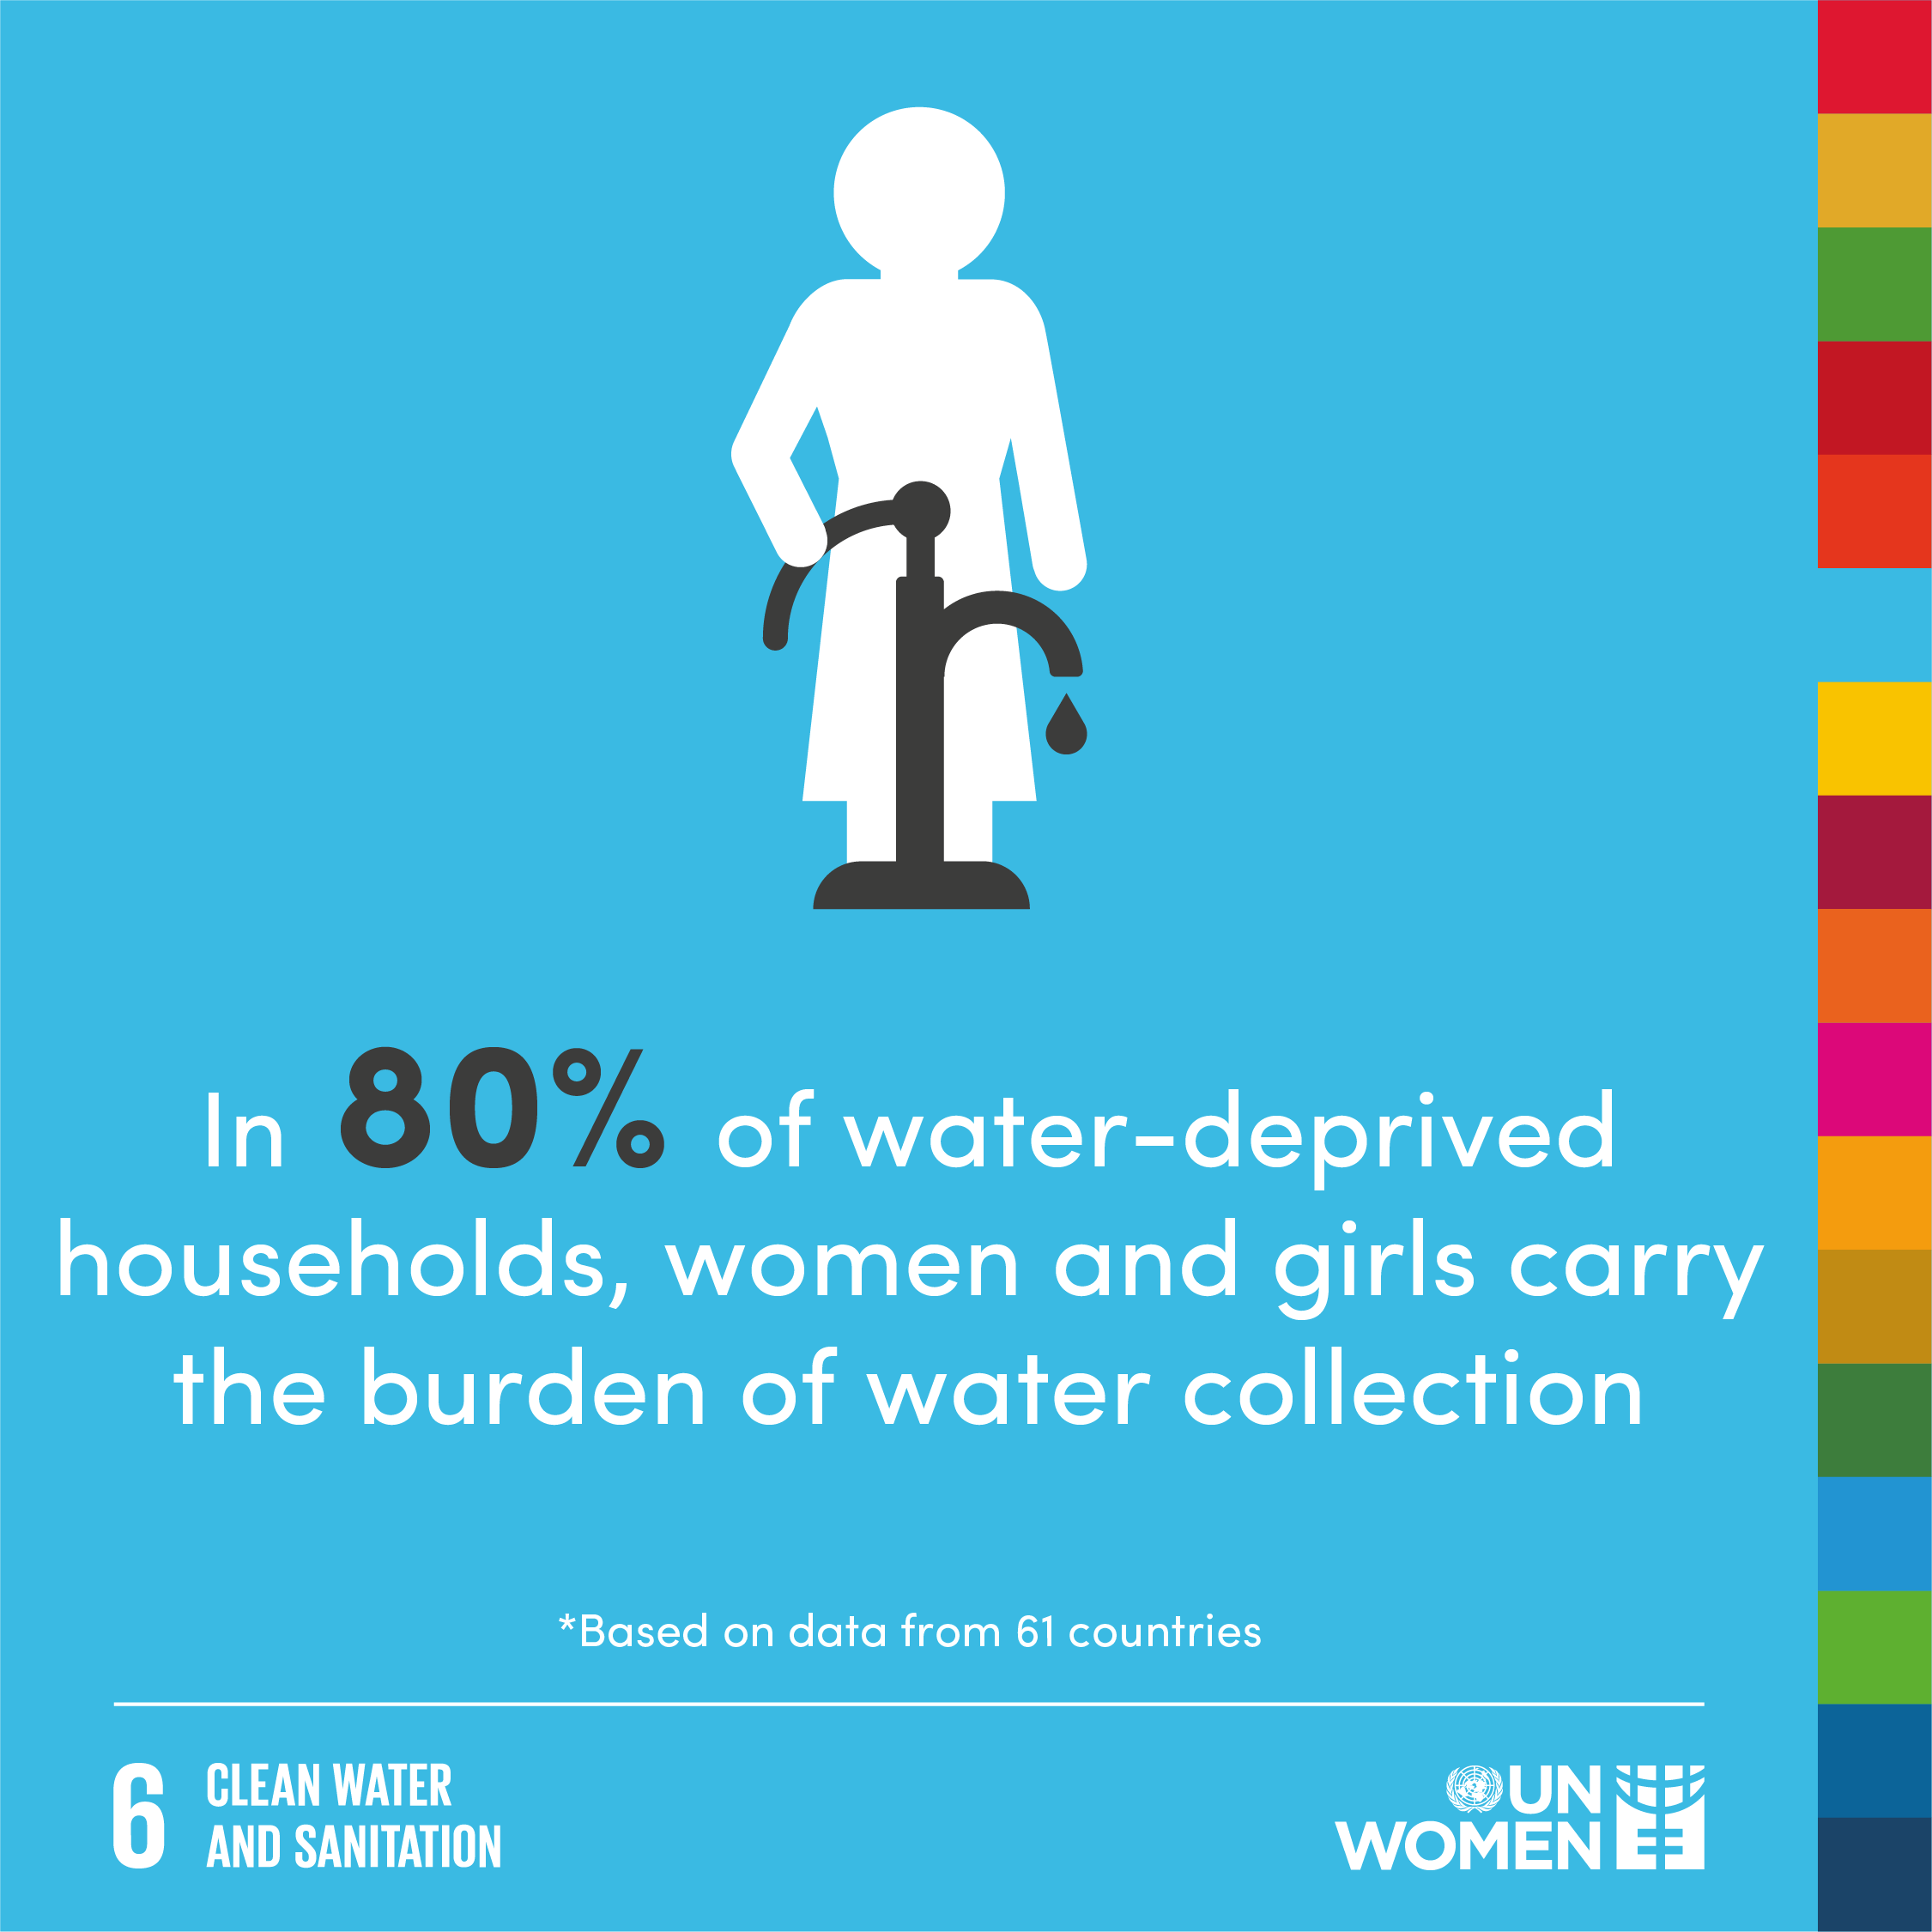 In 80% of water-deprived households, women and girls carry the burden of water collection